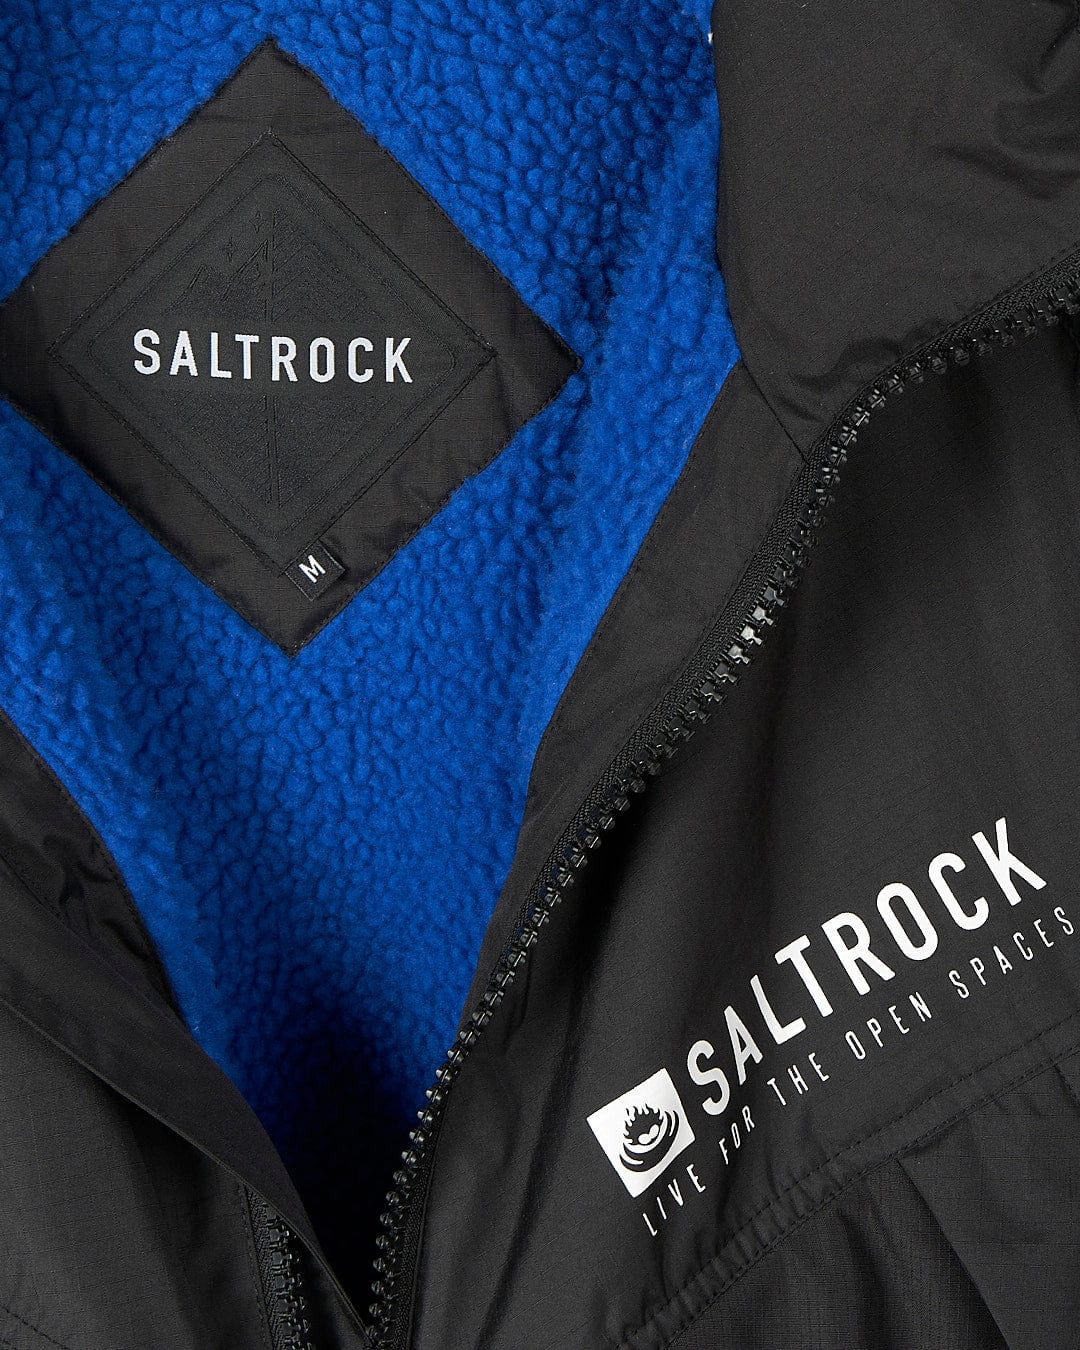 A black jacket with the word Four Seasons - Waterproof Changing Robe - Black/Blue by Saltrock on it.